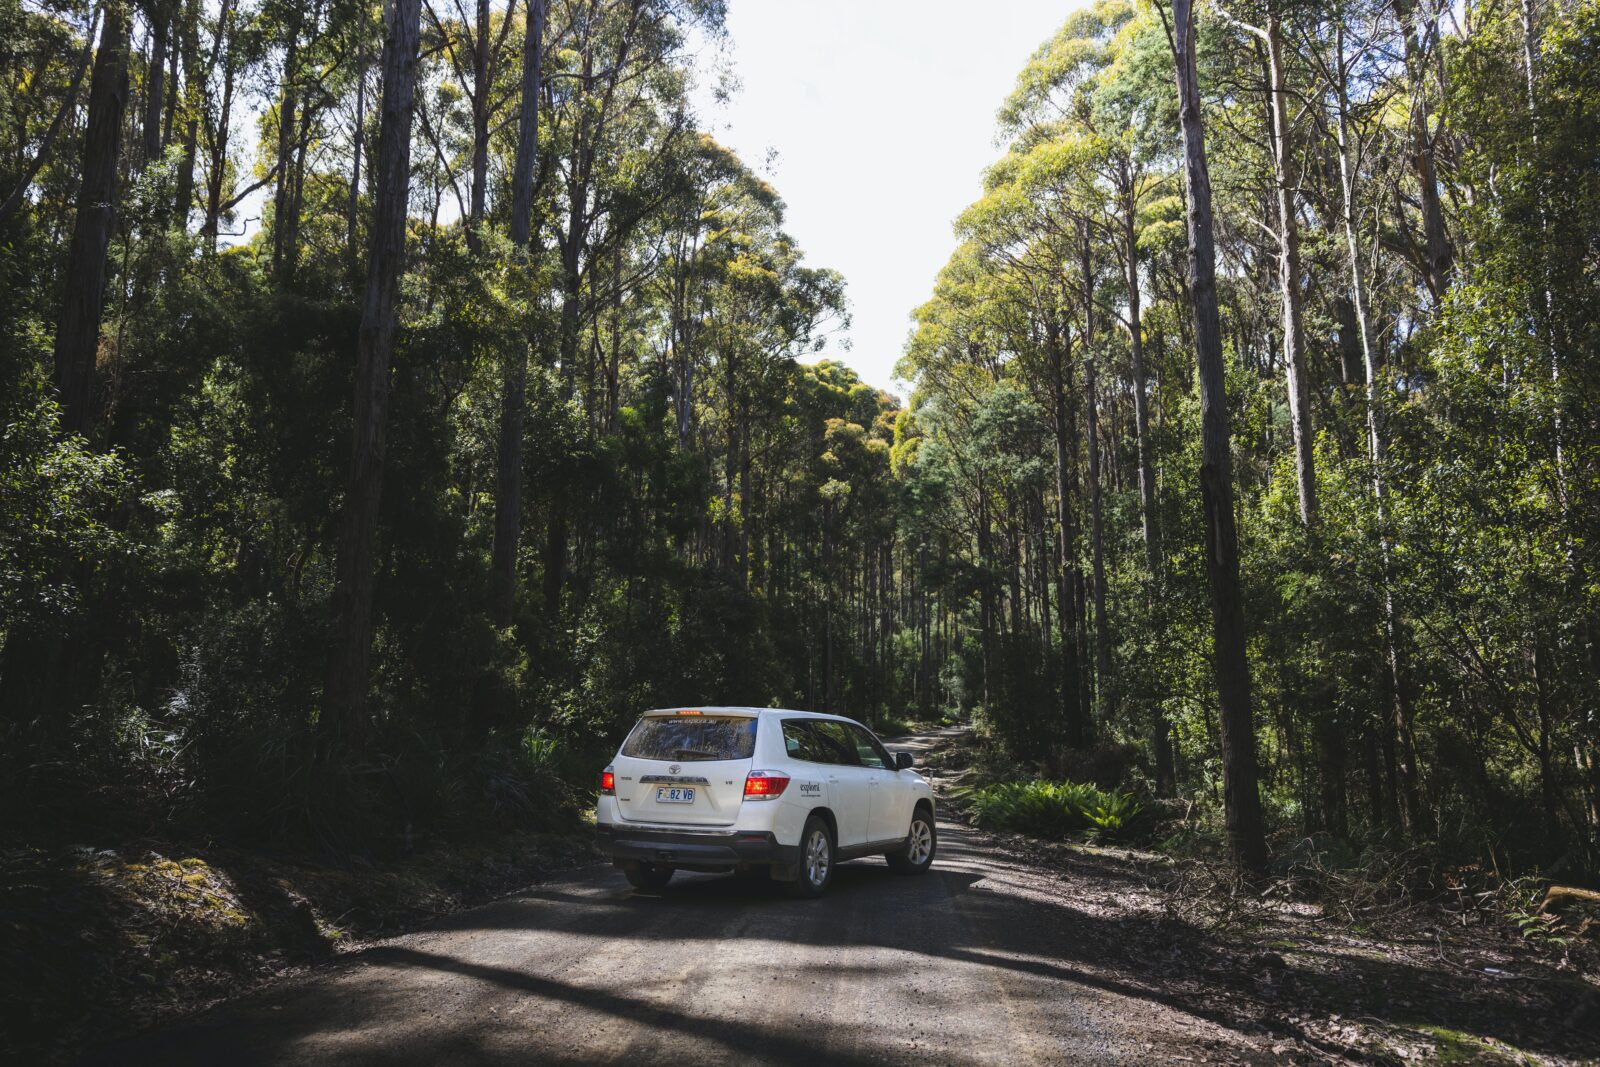 Rent a car from Hobart, fully equipped with camping gear and get set to explore Tasmania freely